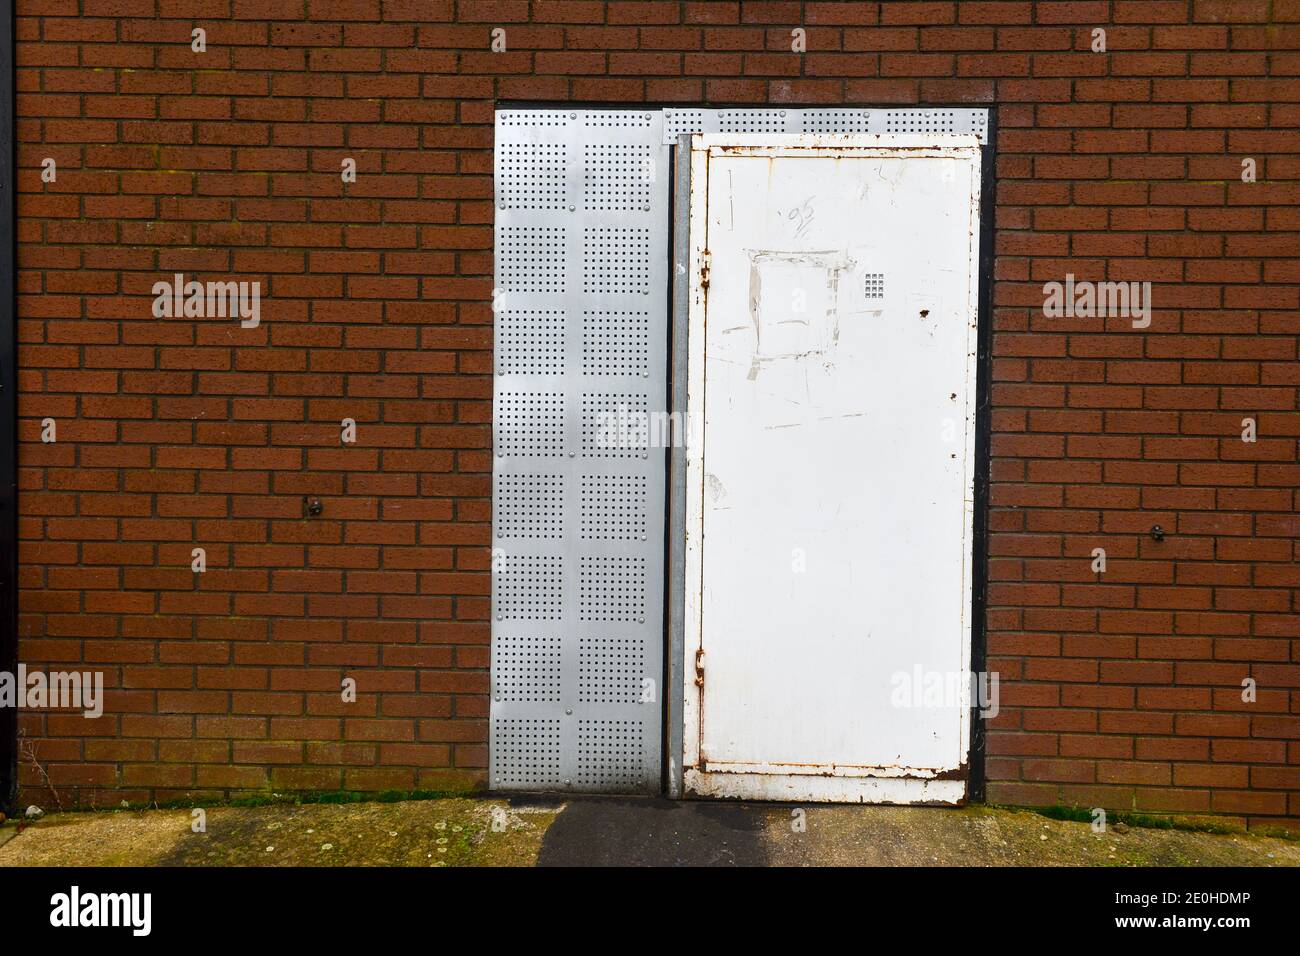 Cambridge , Uk , England, 31-12-2020, Old weathered building facade with security matal door with cut out for numbered security pad. Stock Photo